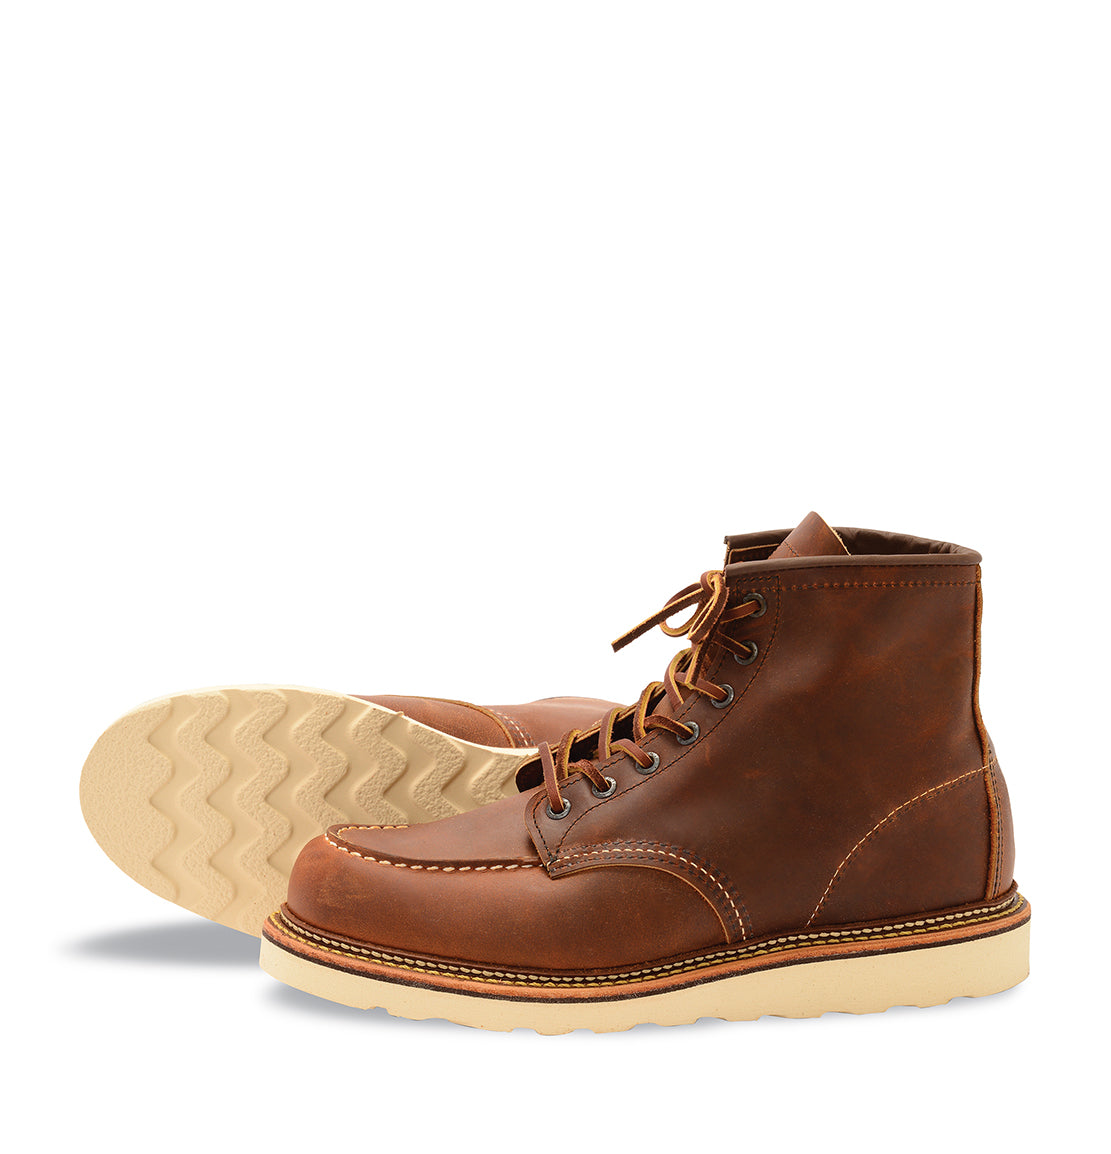 Red wing shoes - Classic Moc 1907 – Idle Torque